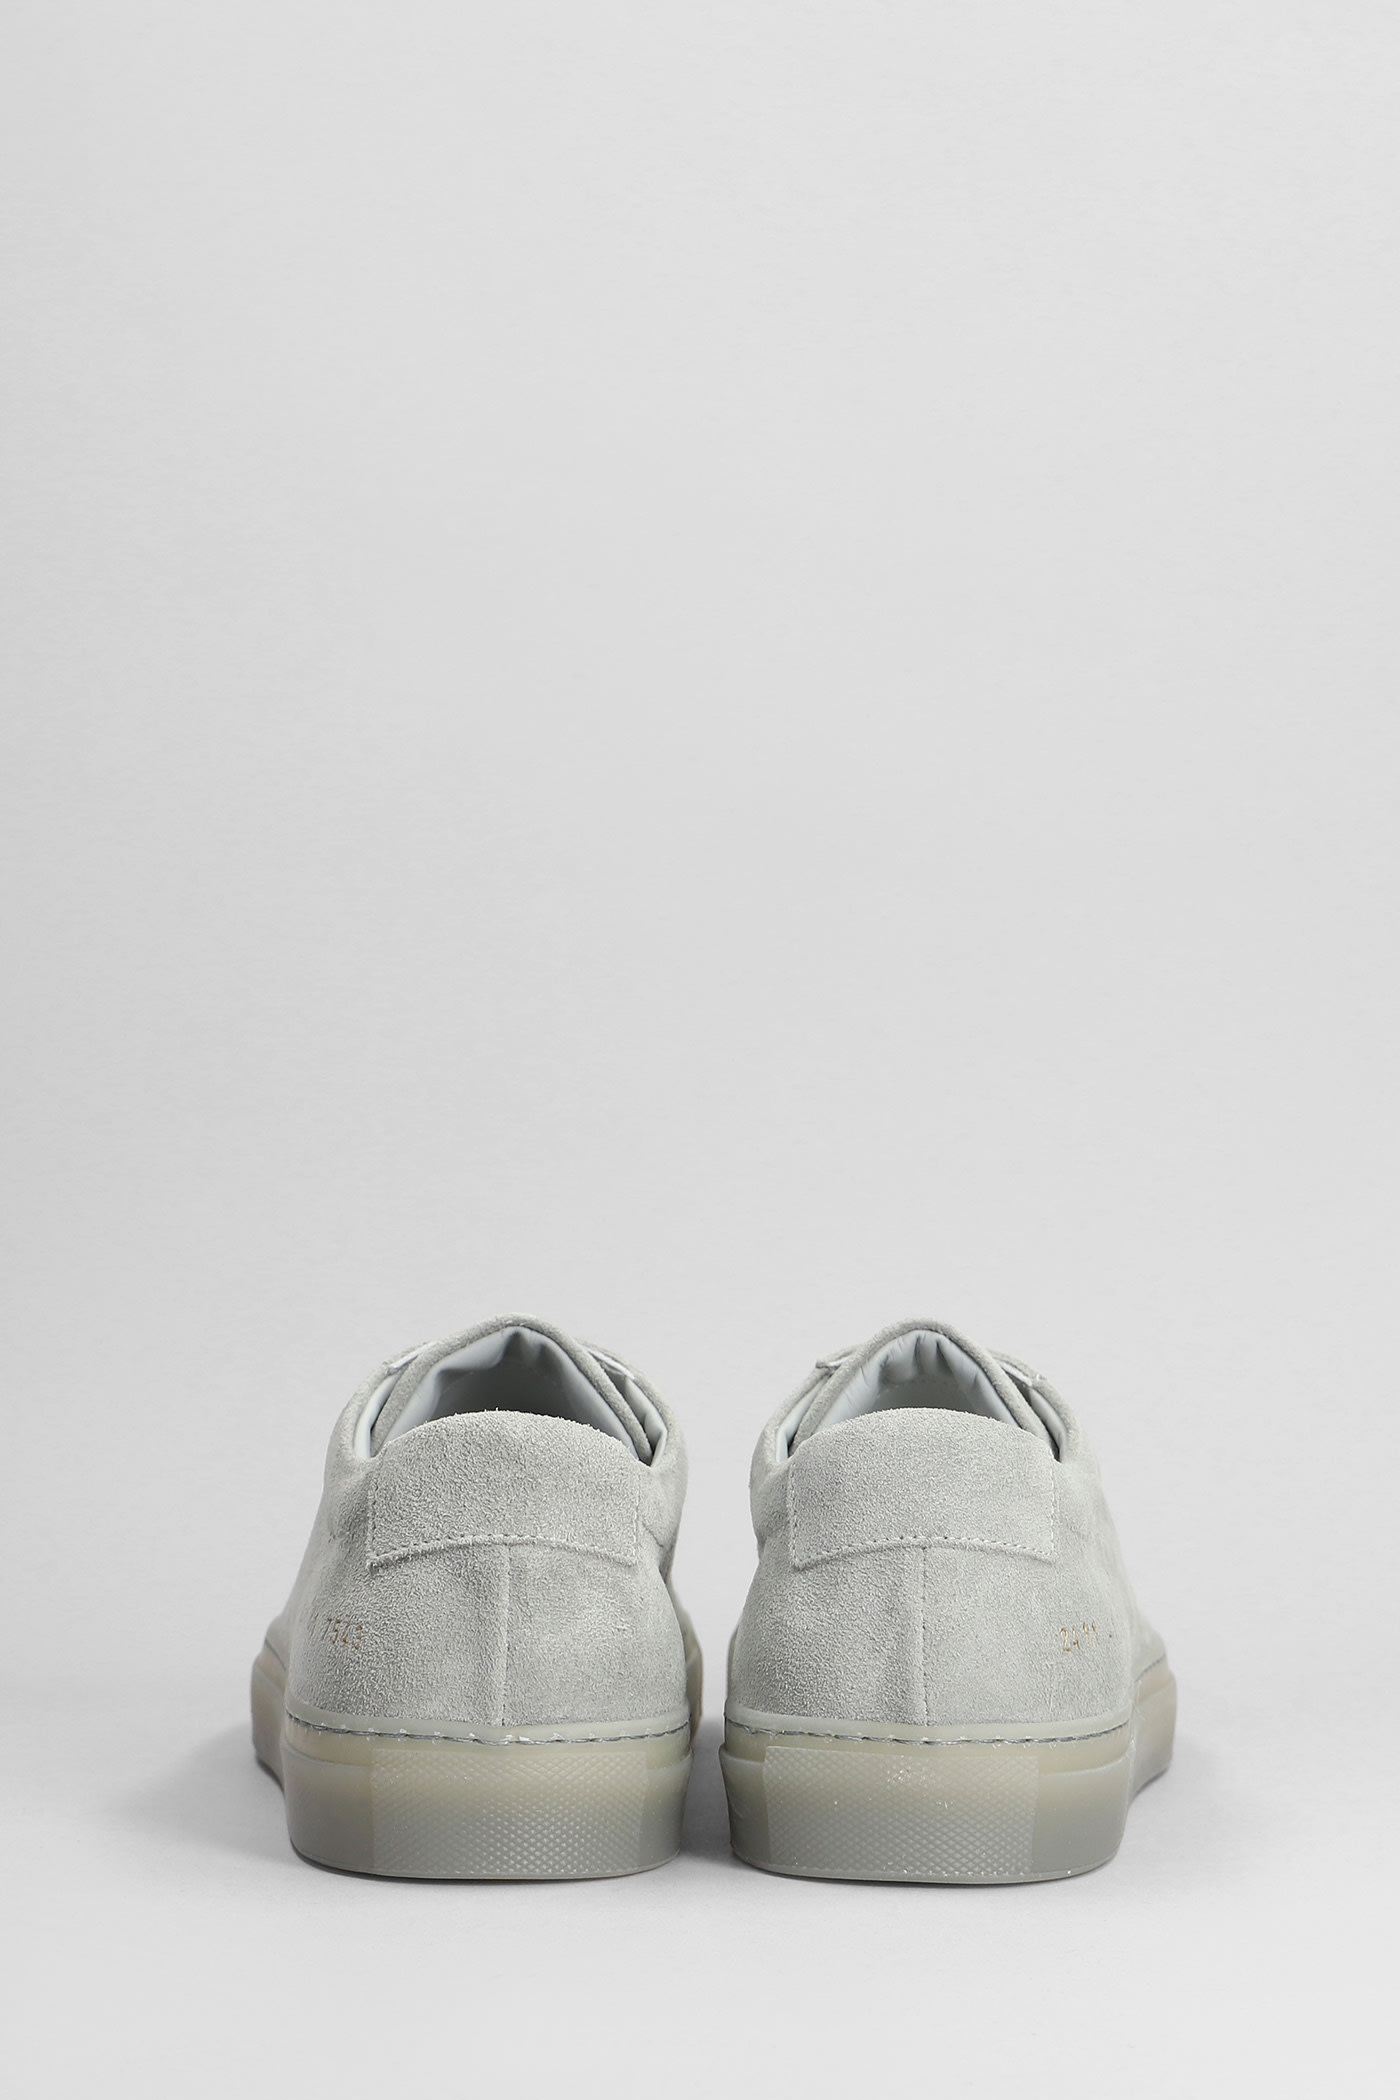 Shop Common Projects Original Achilles Sneakers In Grey Suede